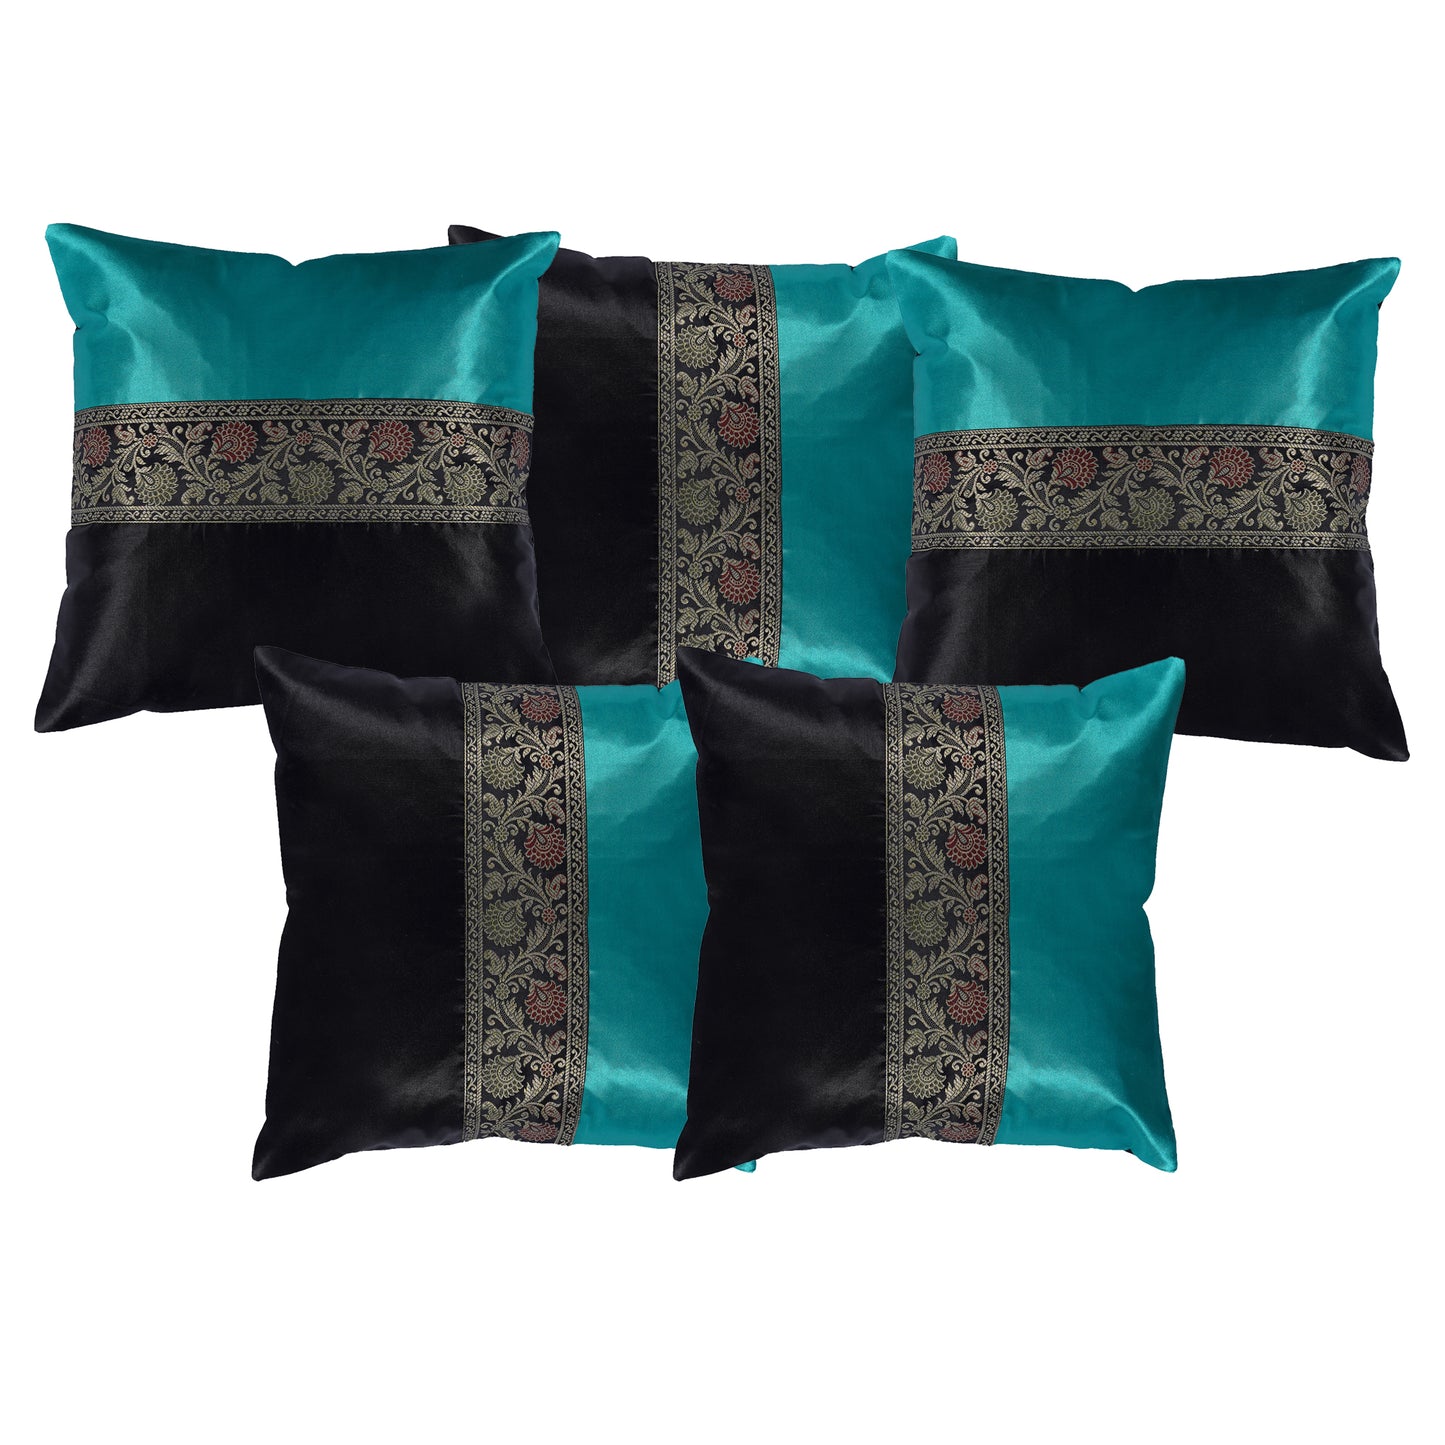 Set of 2 Pc Indian Solid Soft Silky Satin Black & Sea Green Cushion Covers Square Throw Decorative Pillowcases for Couch Sofa Home Décor 16X16 In